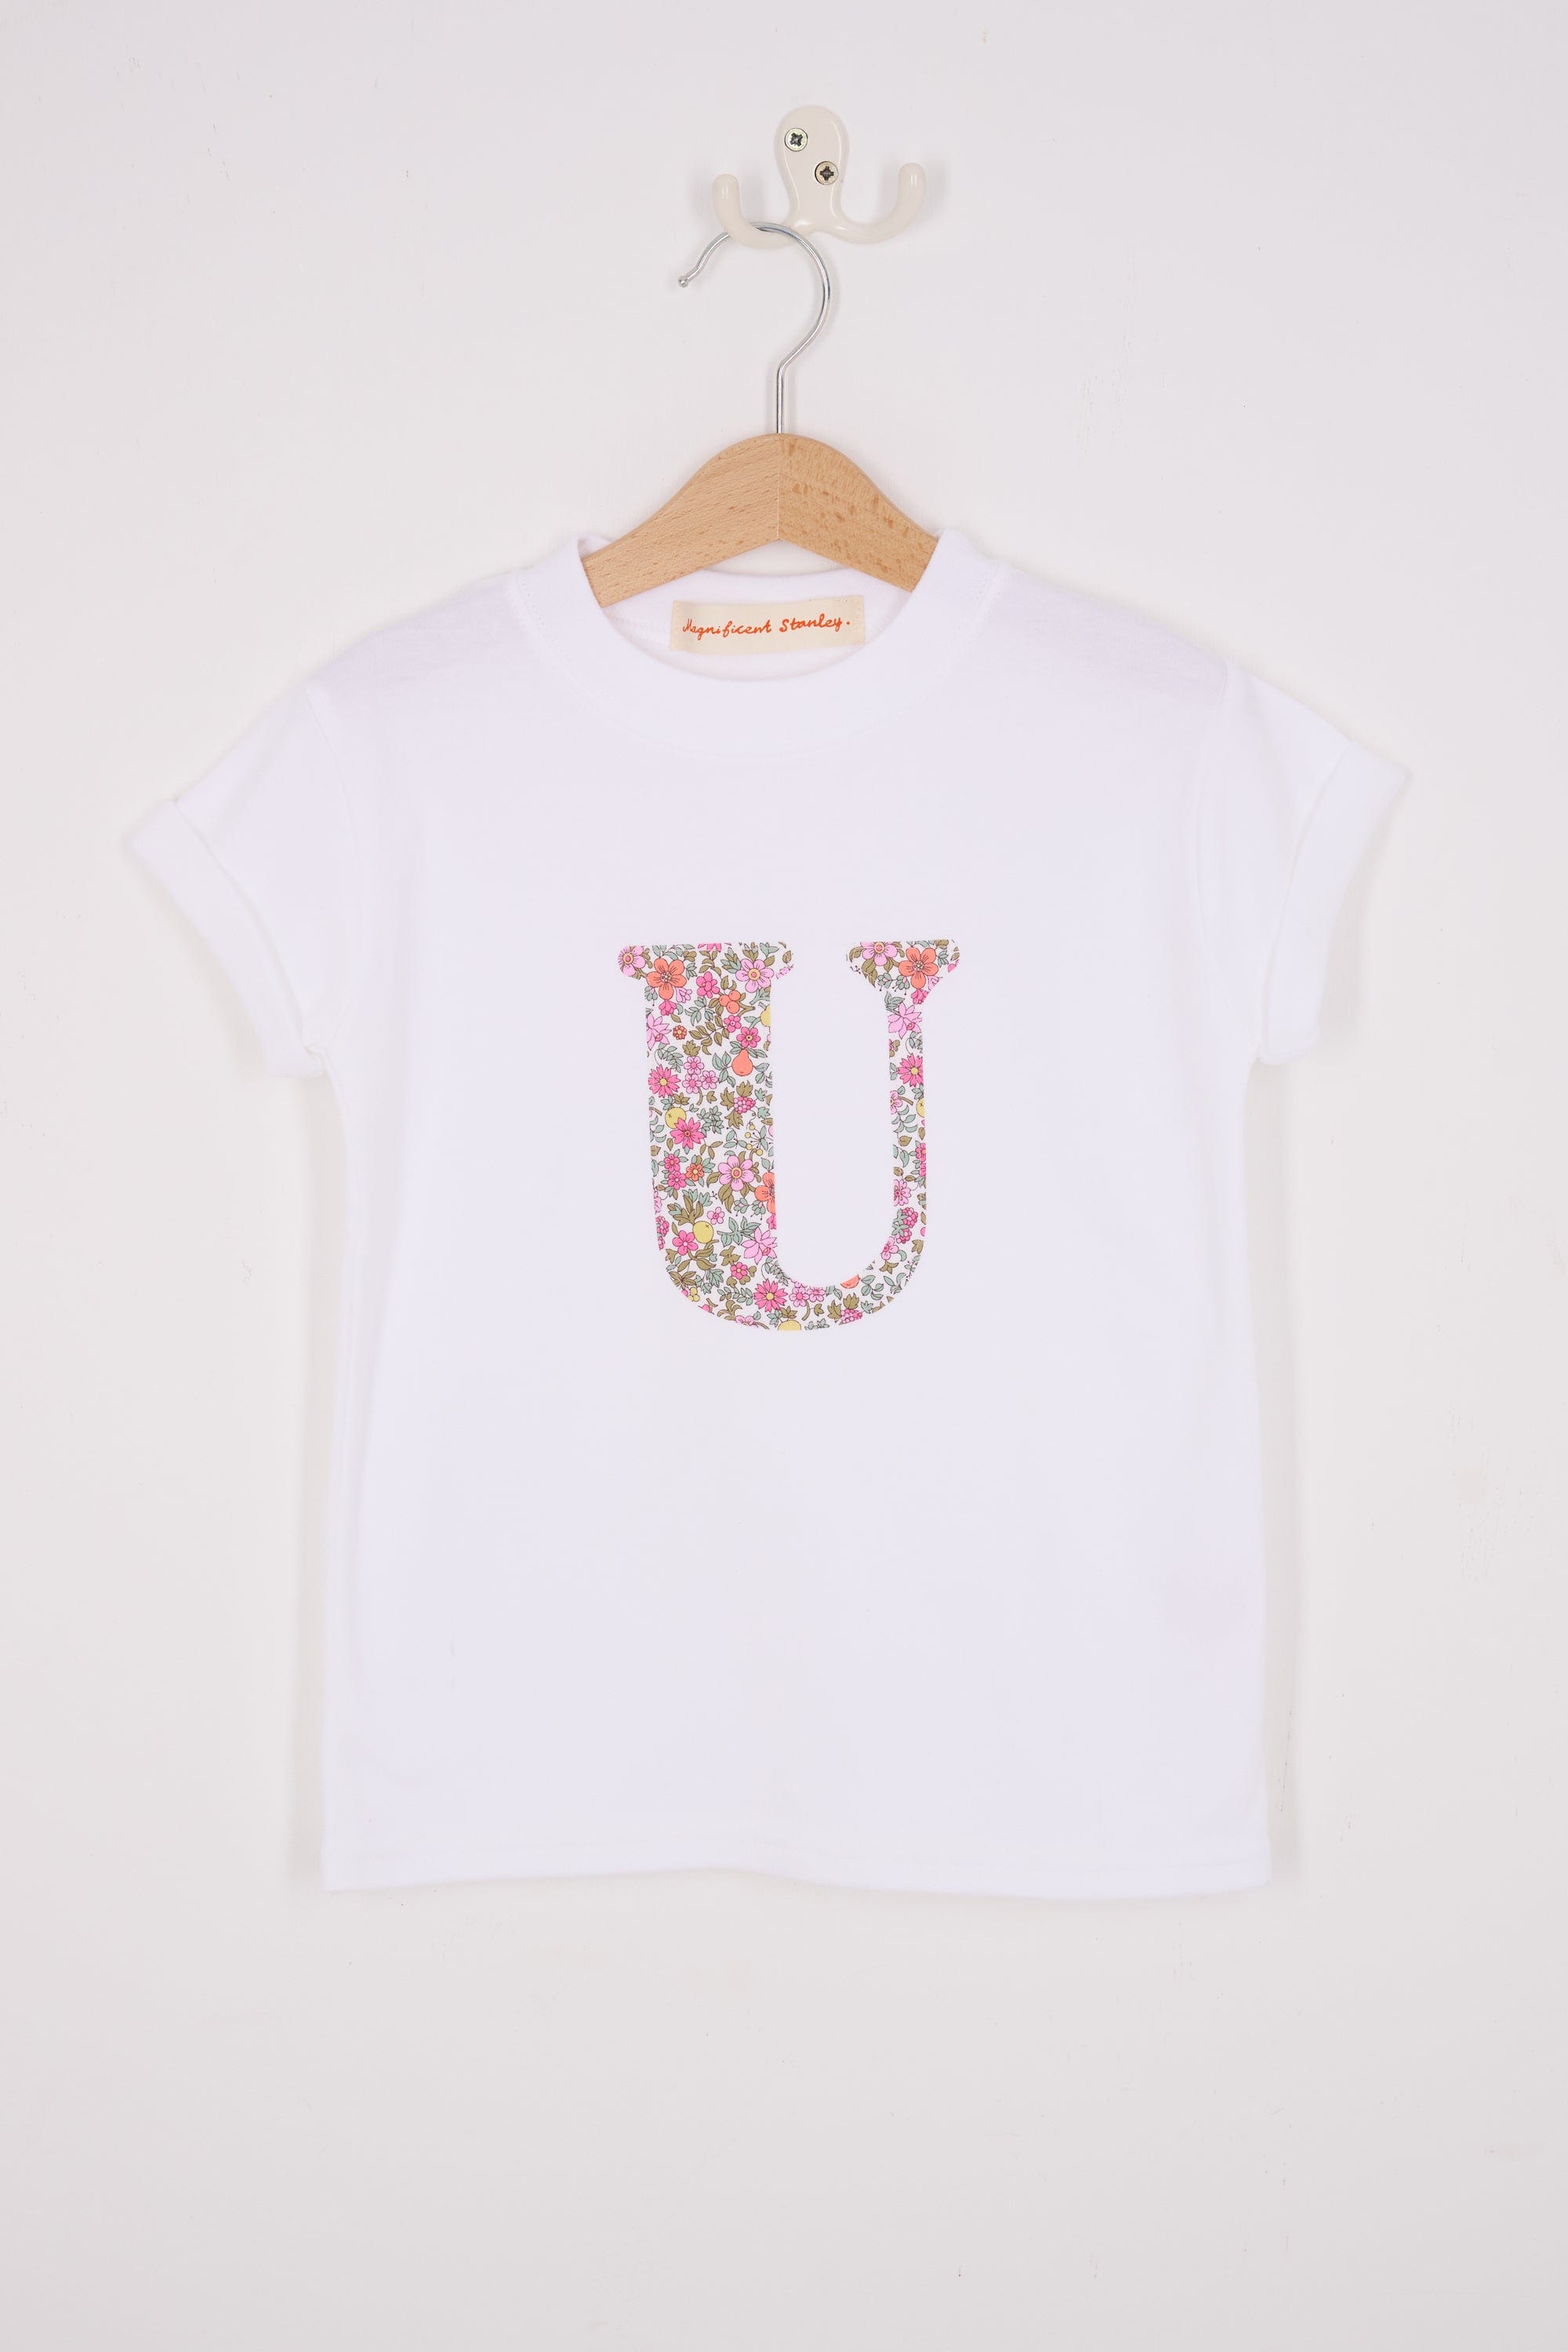 Magnificent Stanley Tee Personalised White T-Shirt in Fruit Punch Liberty Print